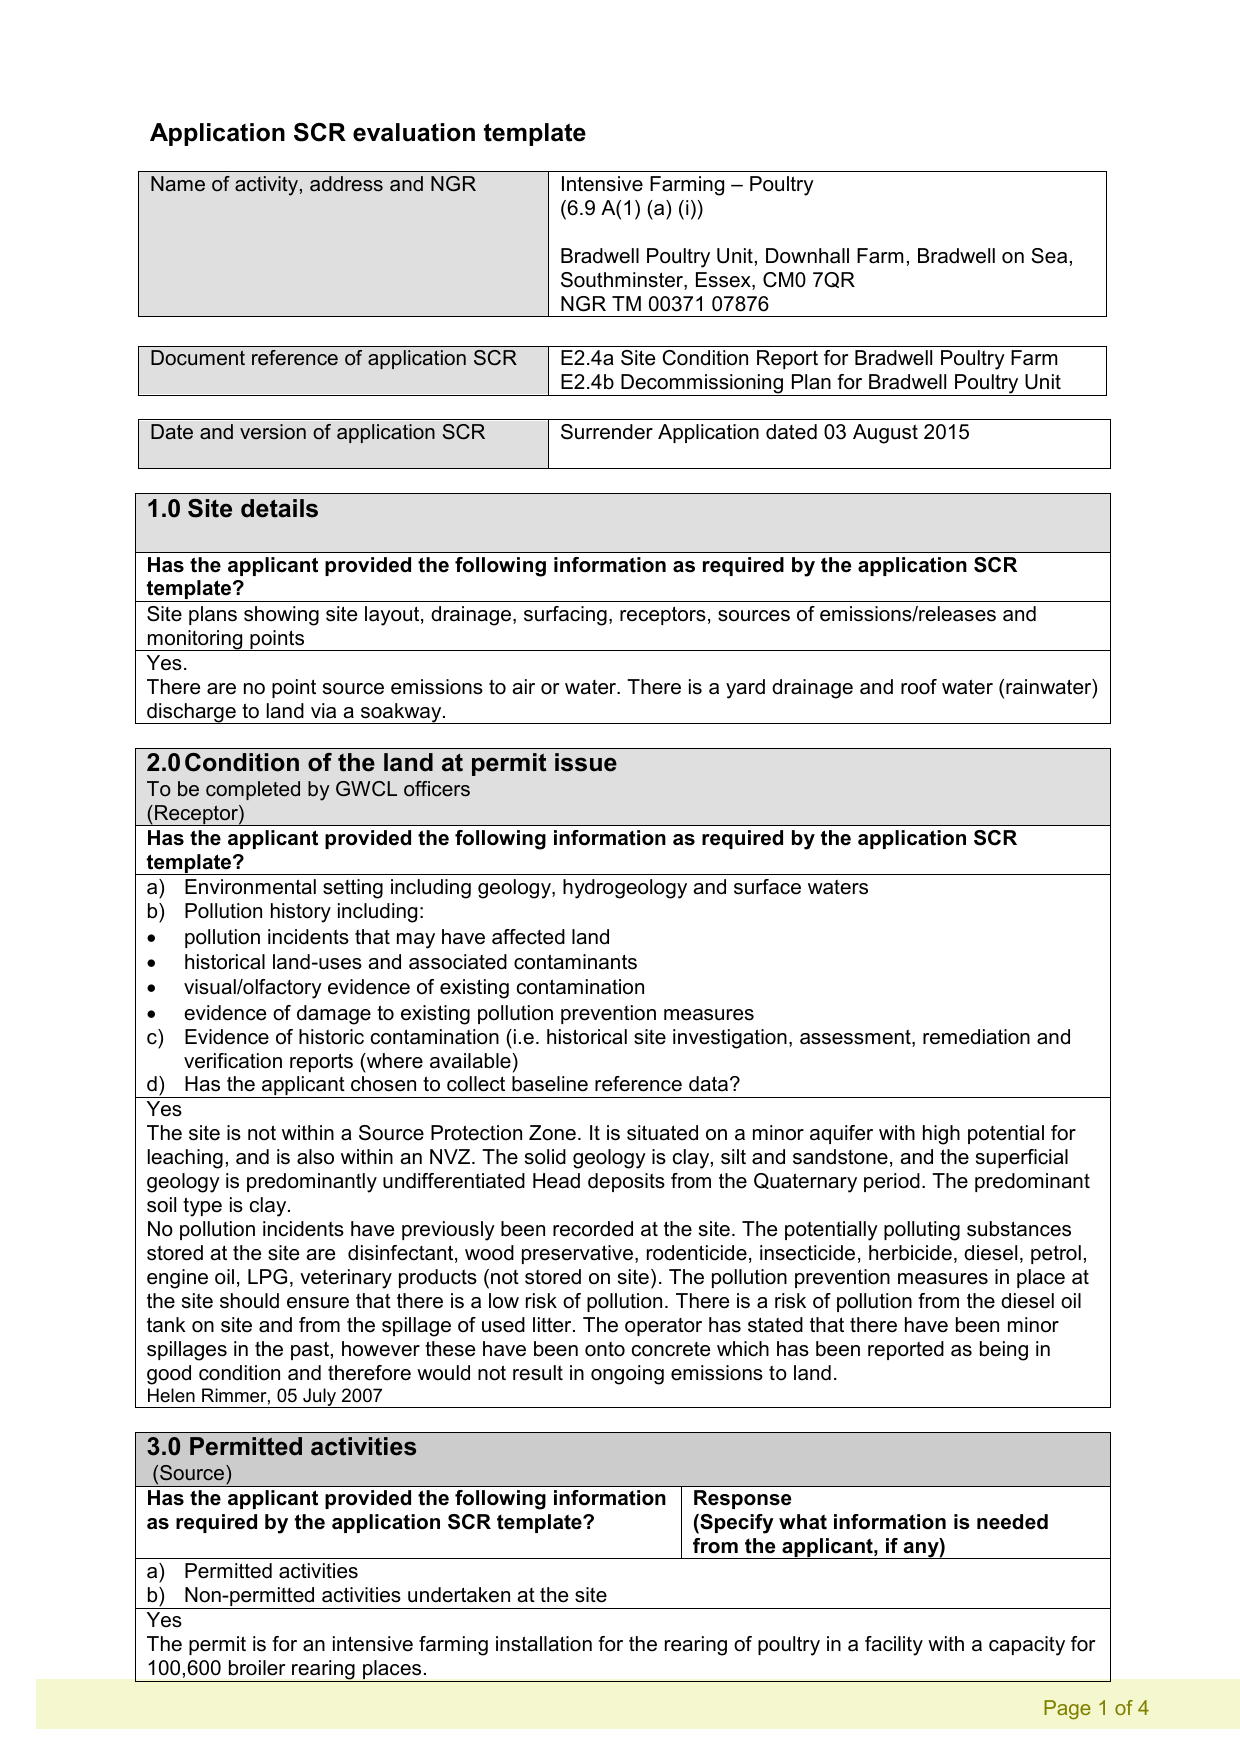 Site condition report evaluation template For Monitoring And Evaluation Report Template